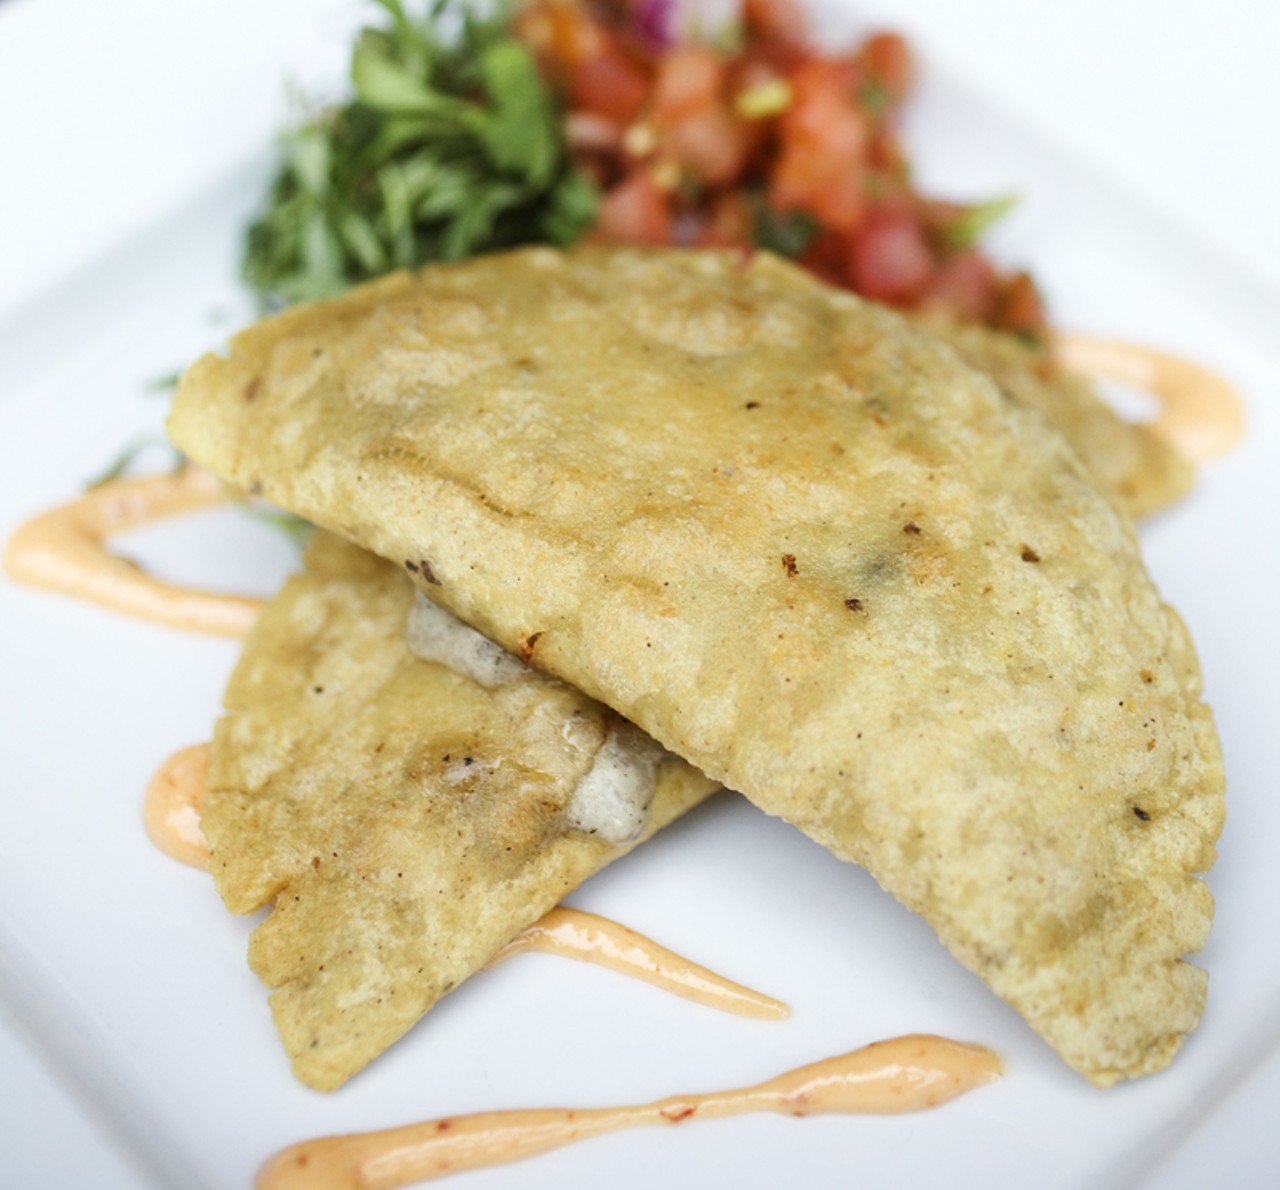 The Quesadillas Tradicionales are corn masa turnovers filled with saut&eacute;ed huitlacoche, &lsquo;Mexican truffles&rsquo;, wild mushrooms and  chihuaha cheese, accompanied by chipotle lime aioli.